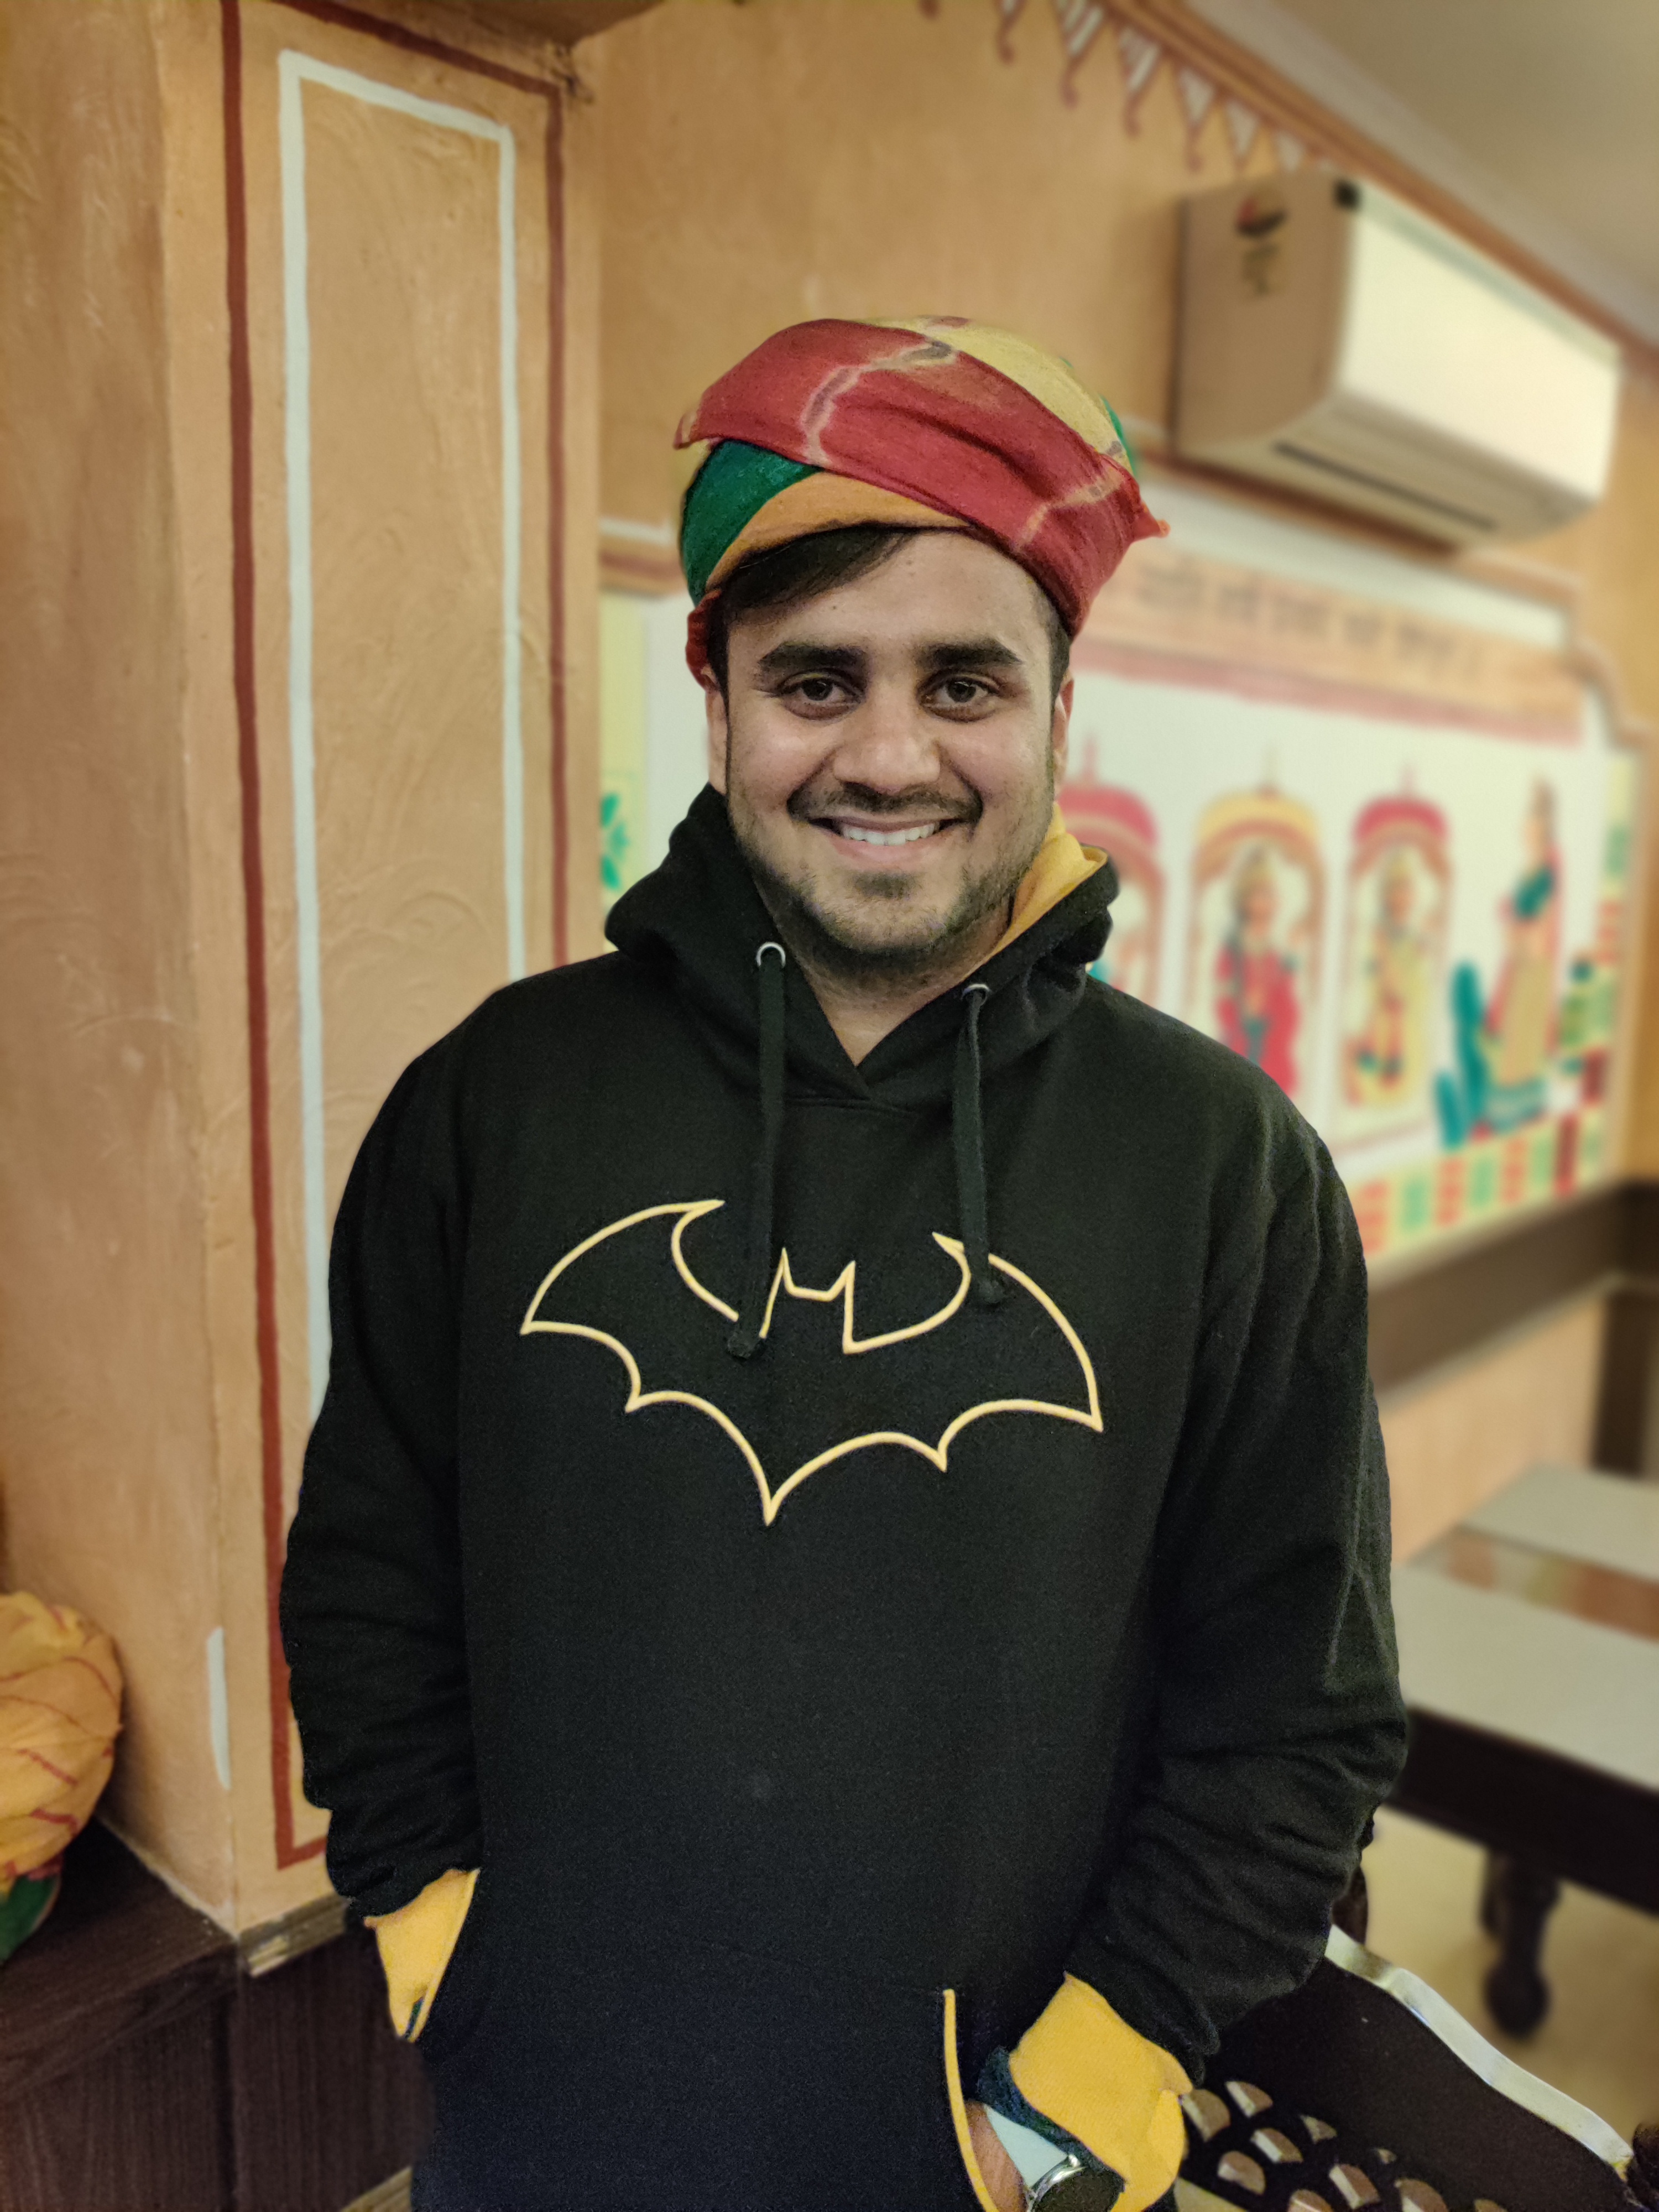 Subhav Dubey Talks About Gaming, Content Creation And Life Beyond It All